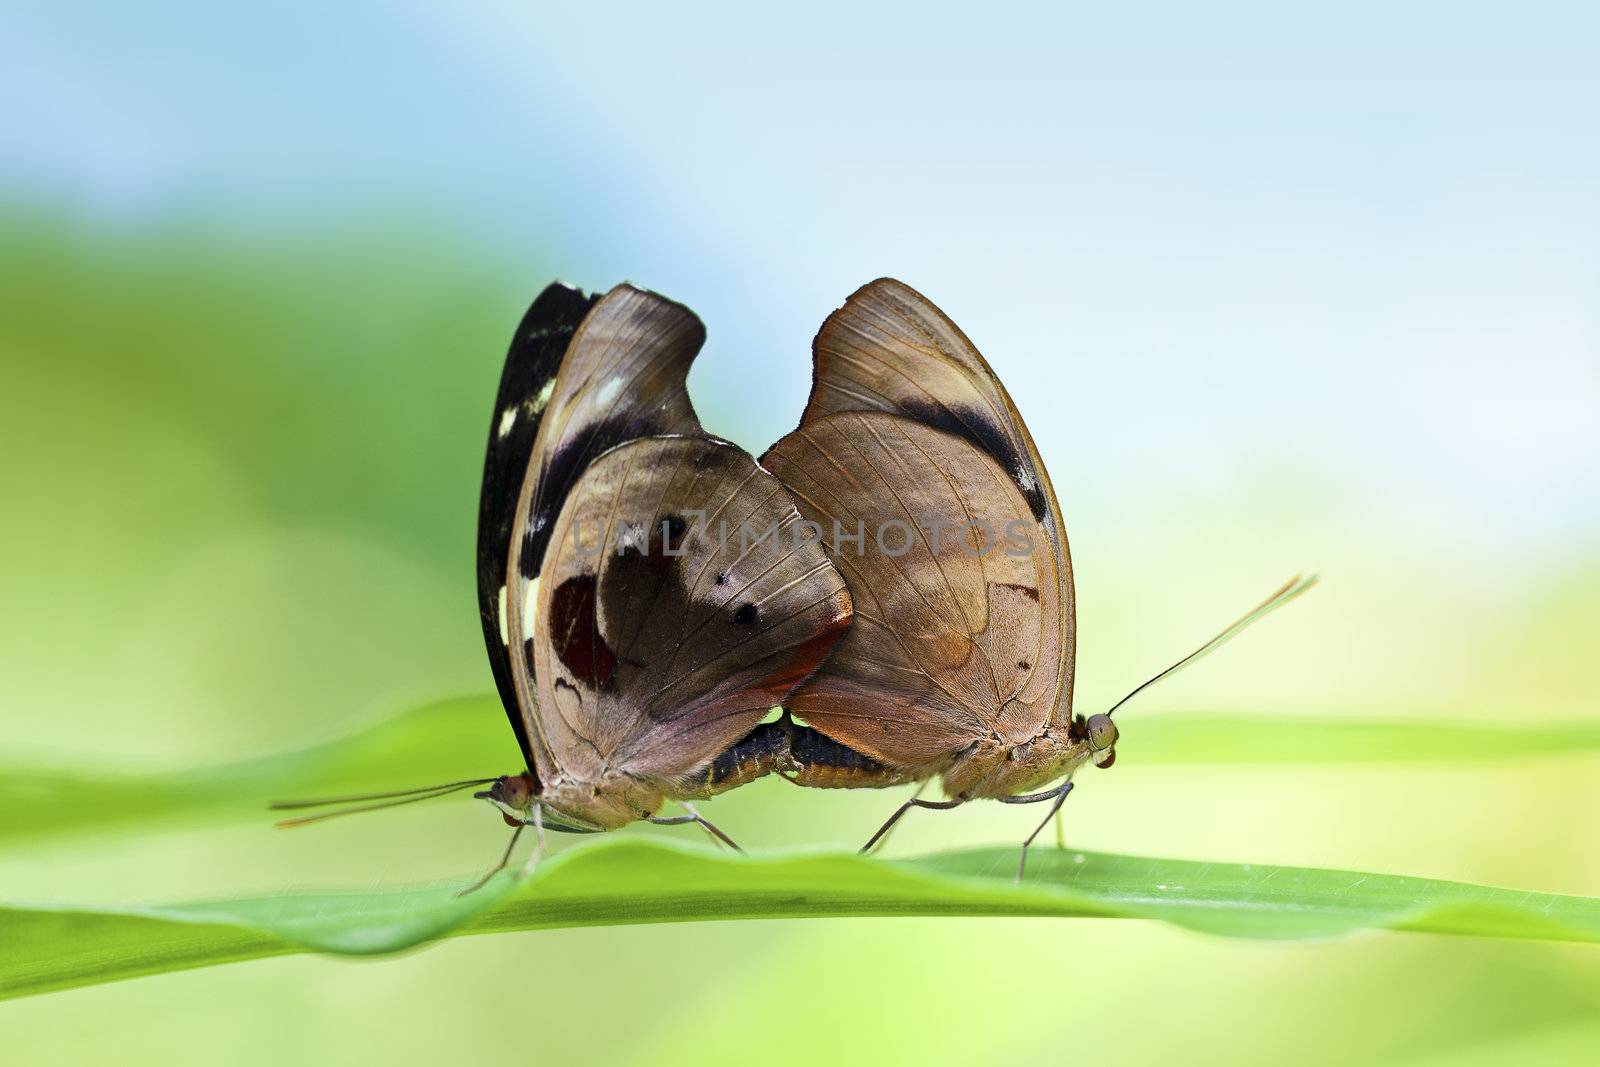 A pair of mating butterflies on a leaf.